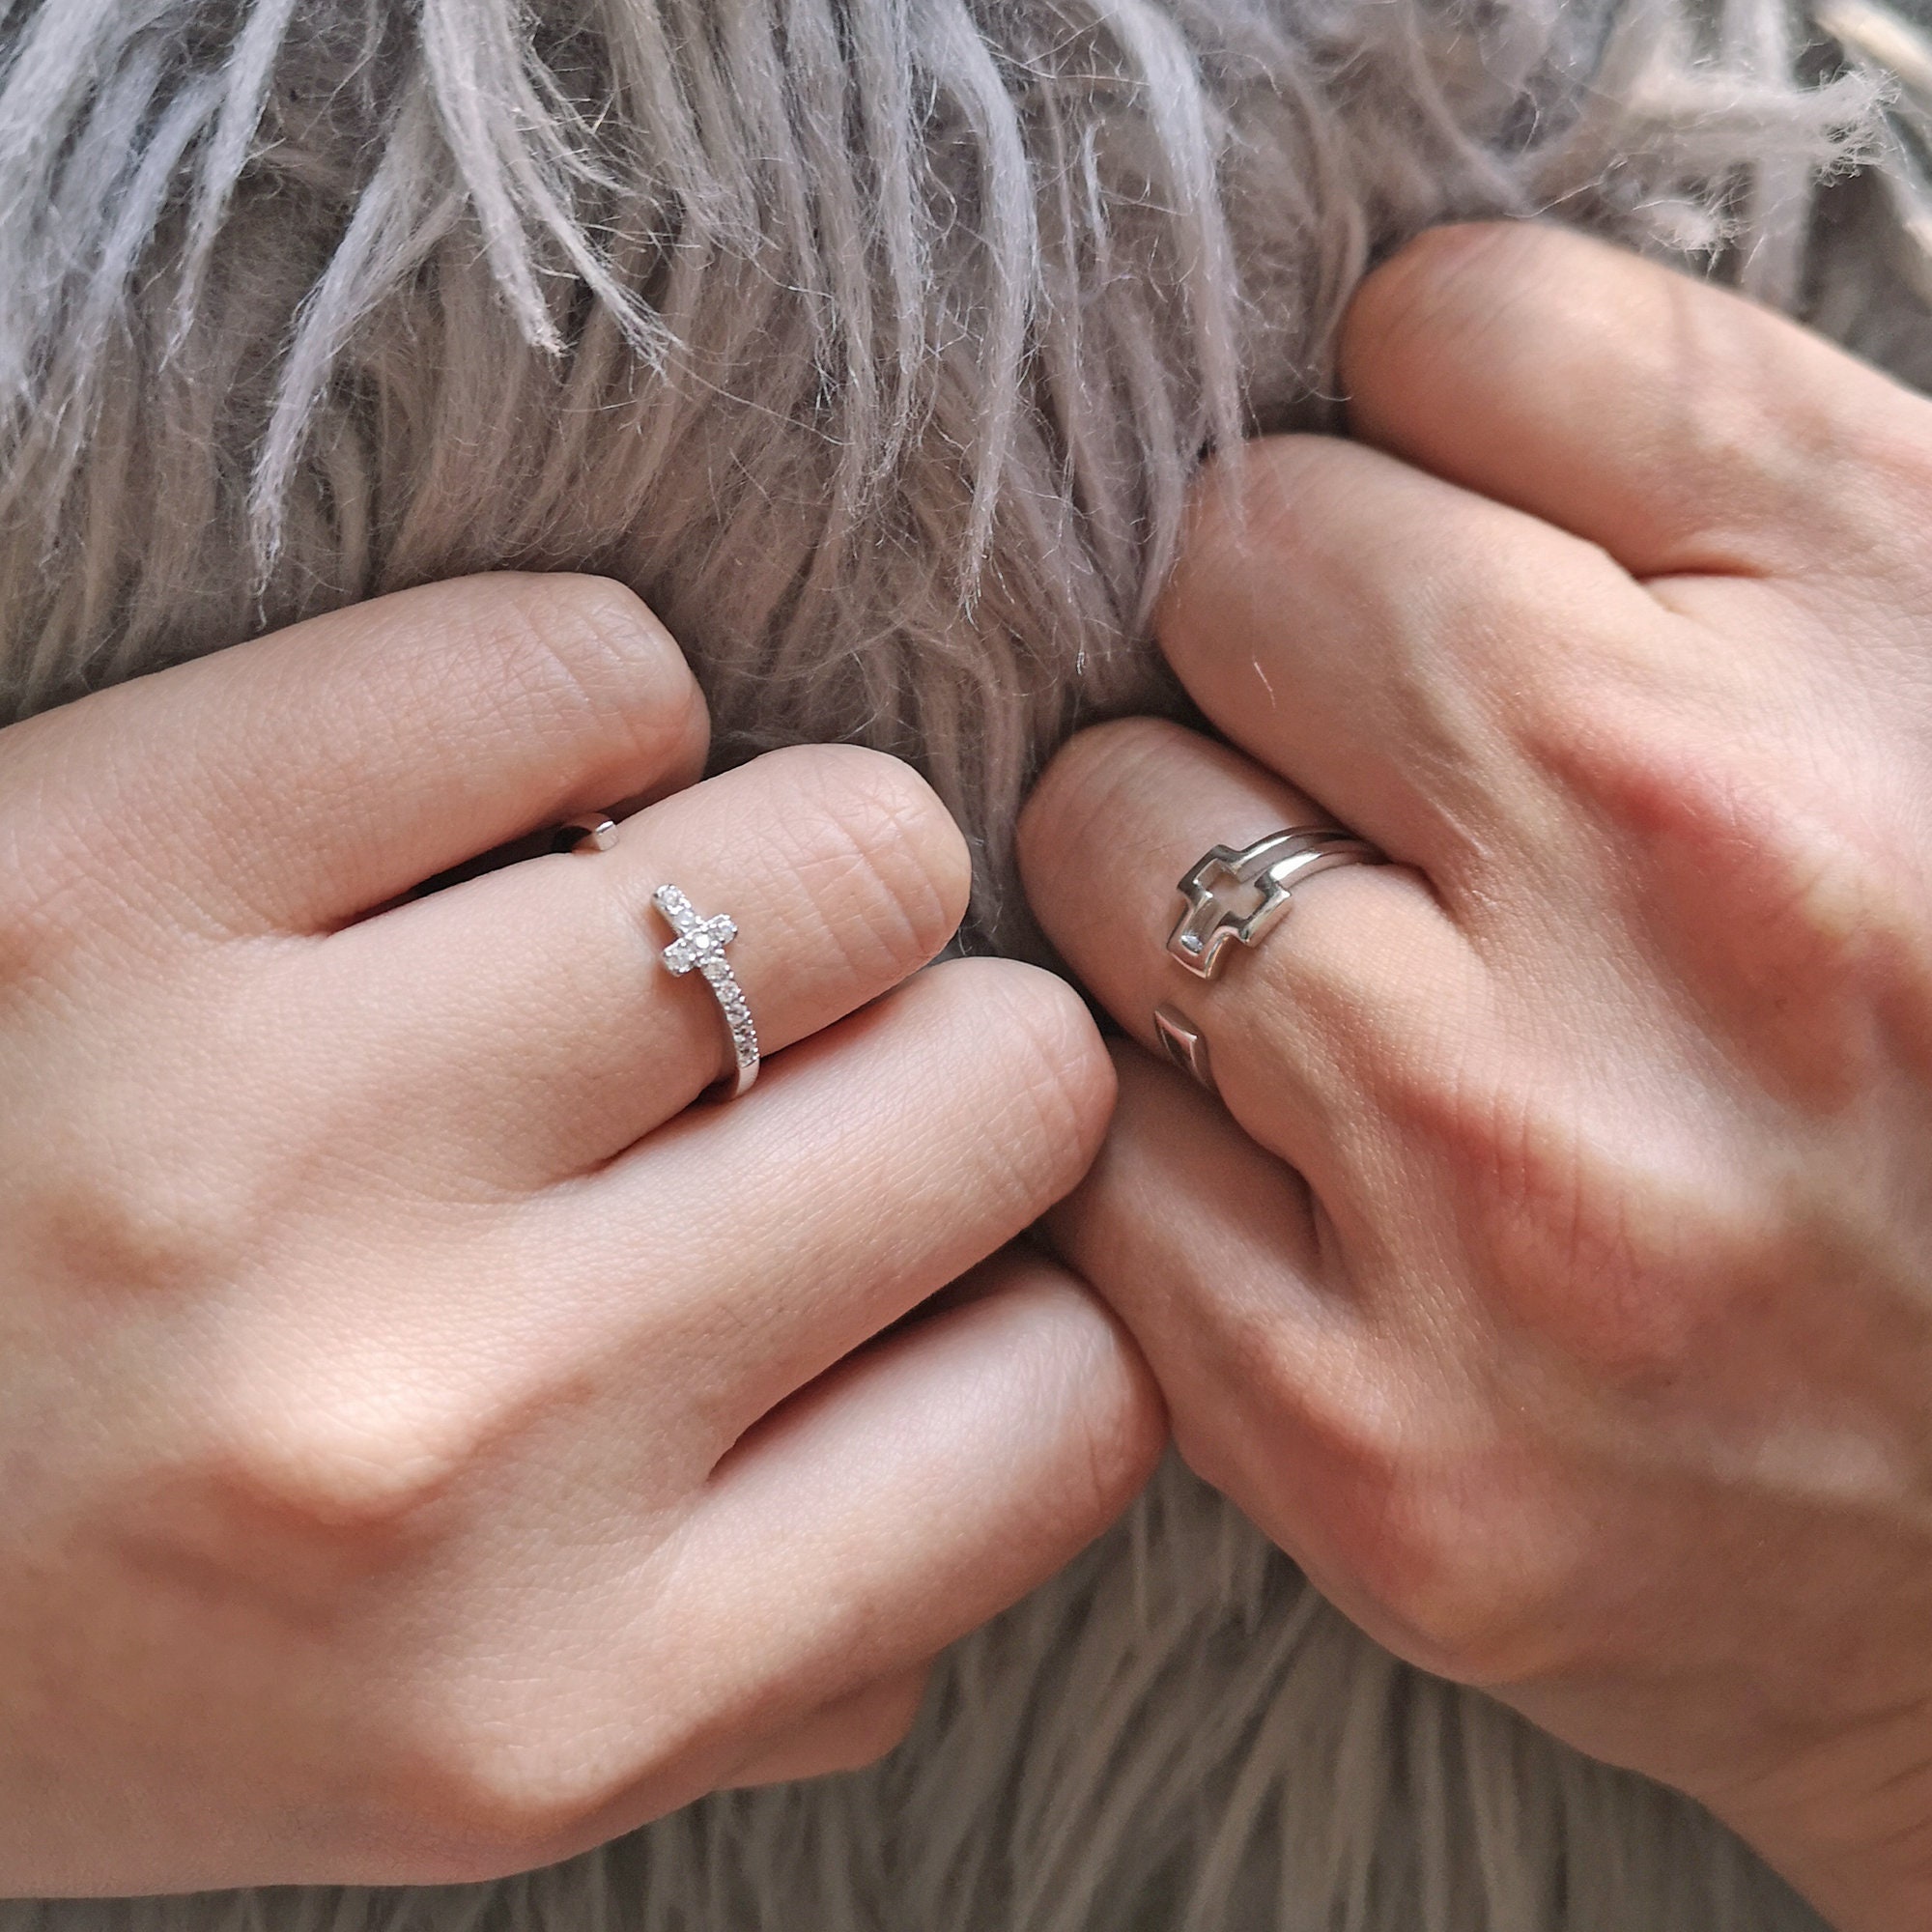 The History of Wedding Rings & How They Changed Over Time